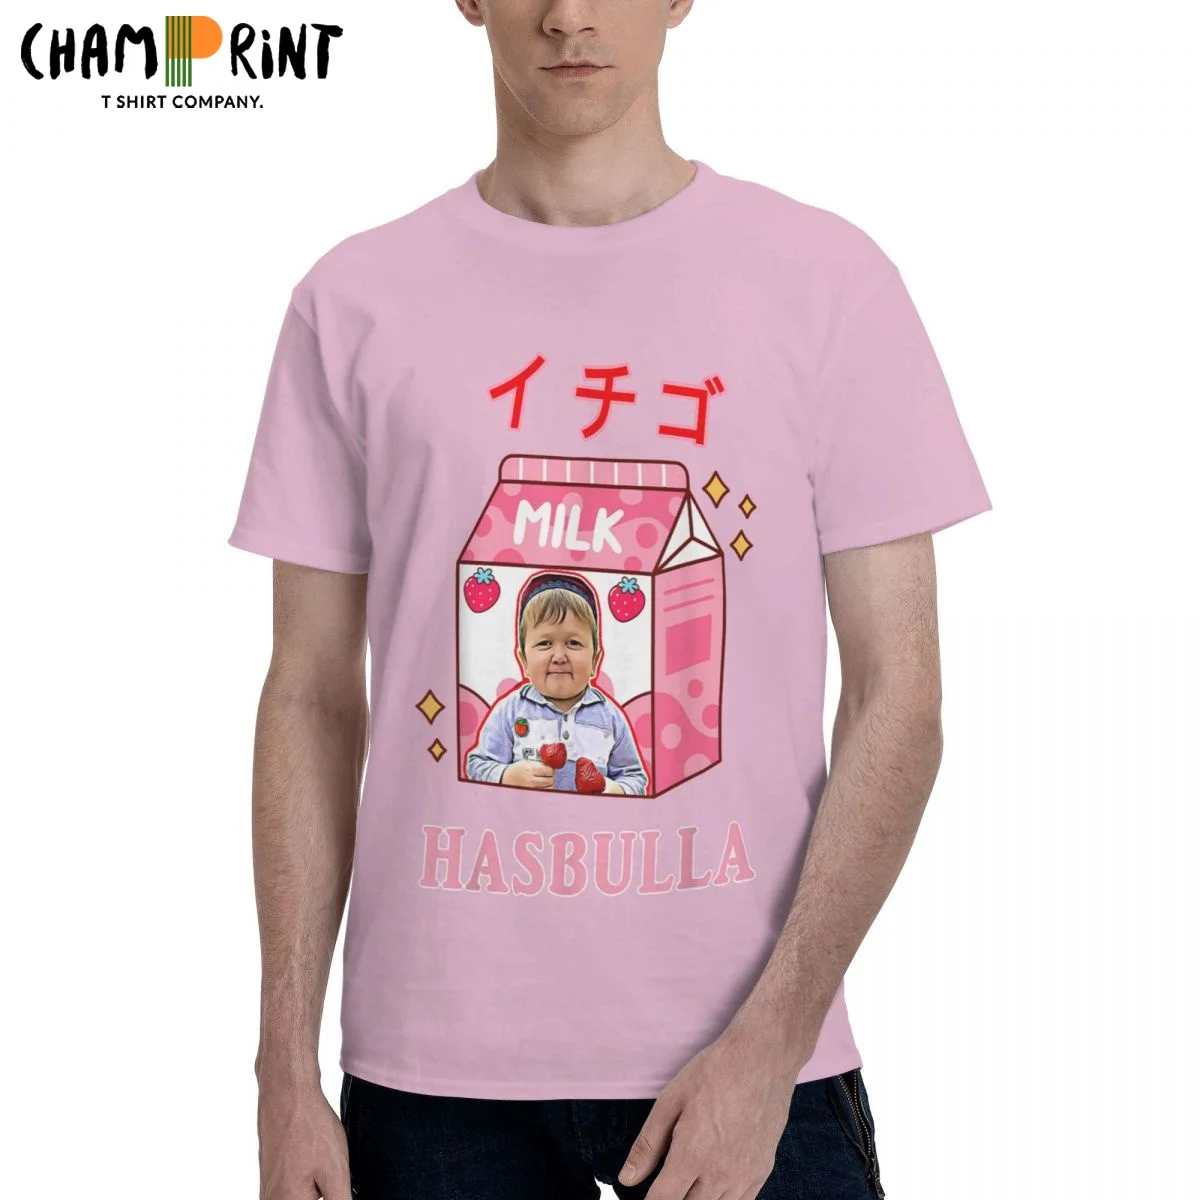 

Funny Hasbulla Hasbullah Strawberry Smile T Shirts for Men 100% Cotton Awesome T-Shirt Crew Neck Tee Shirt Short Sleeve Clothes